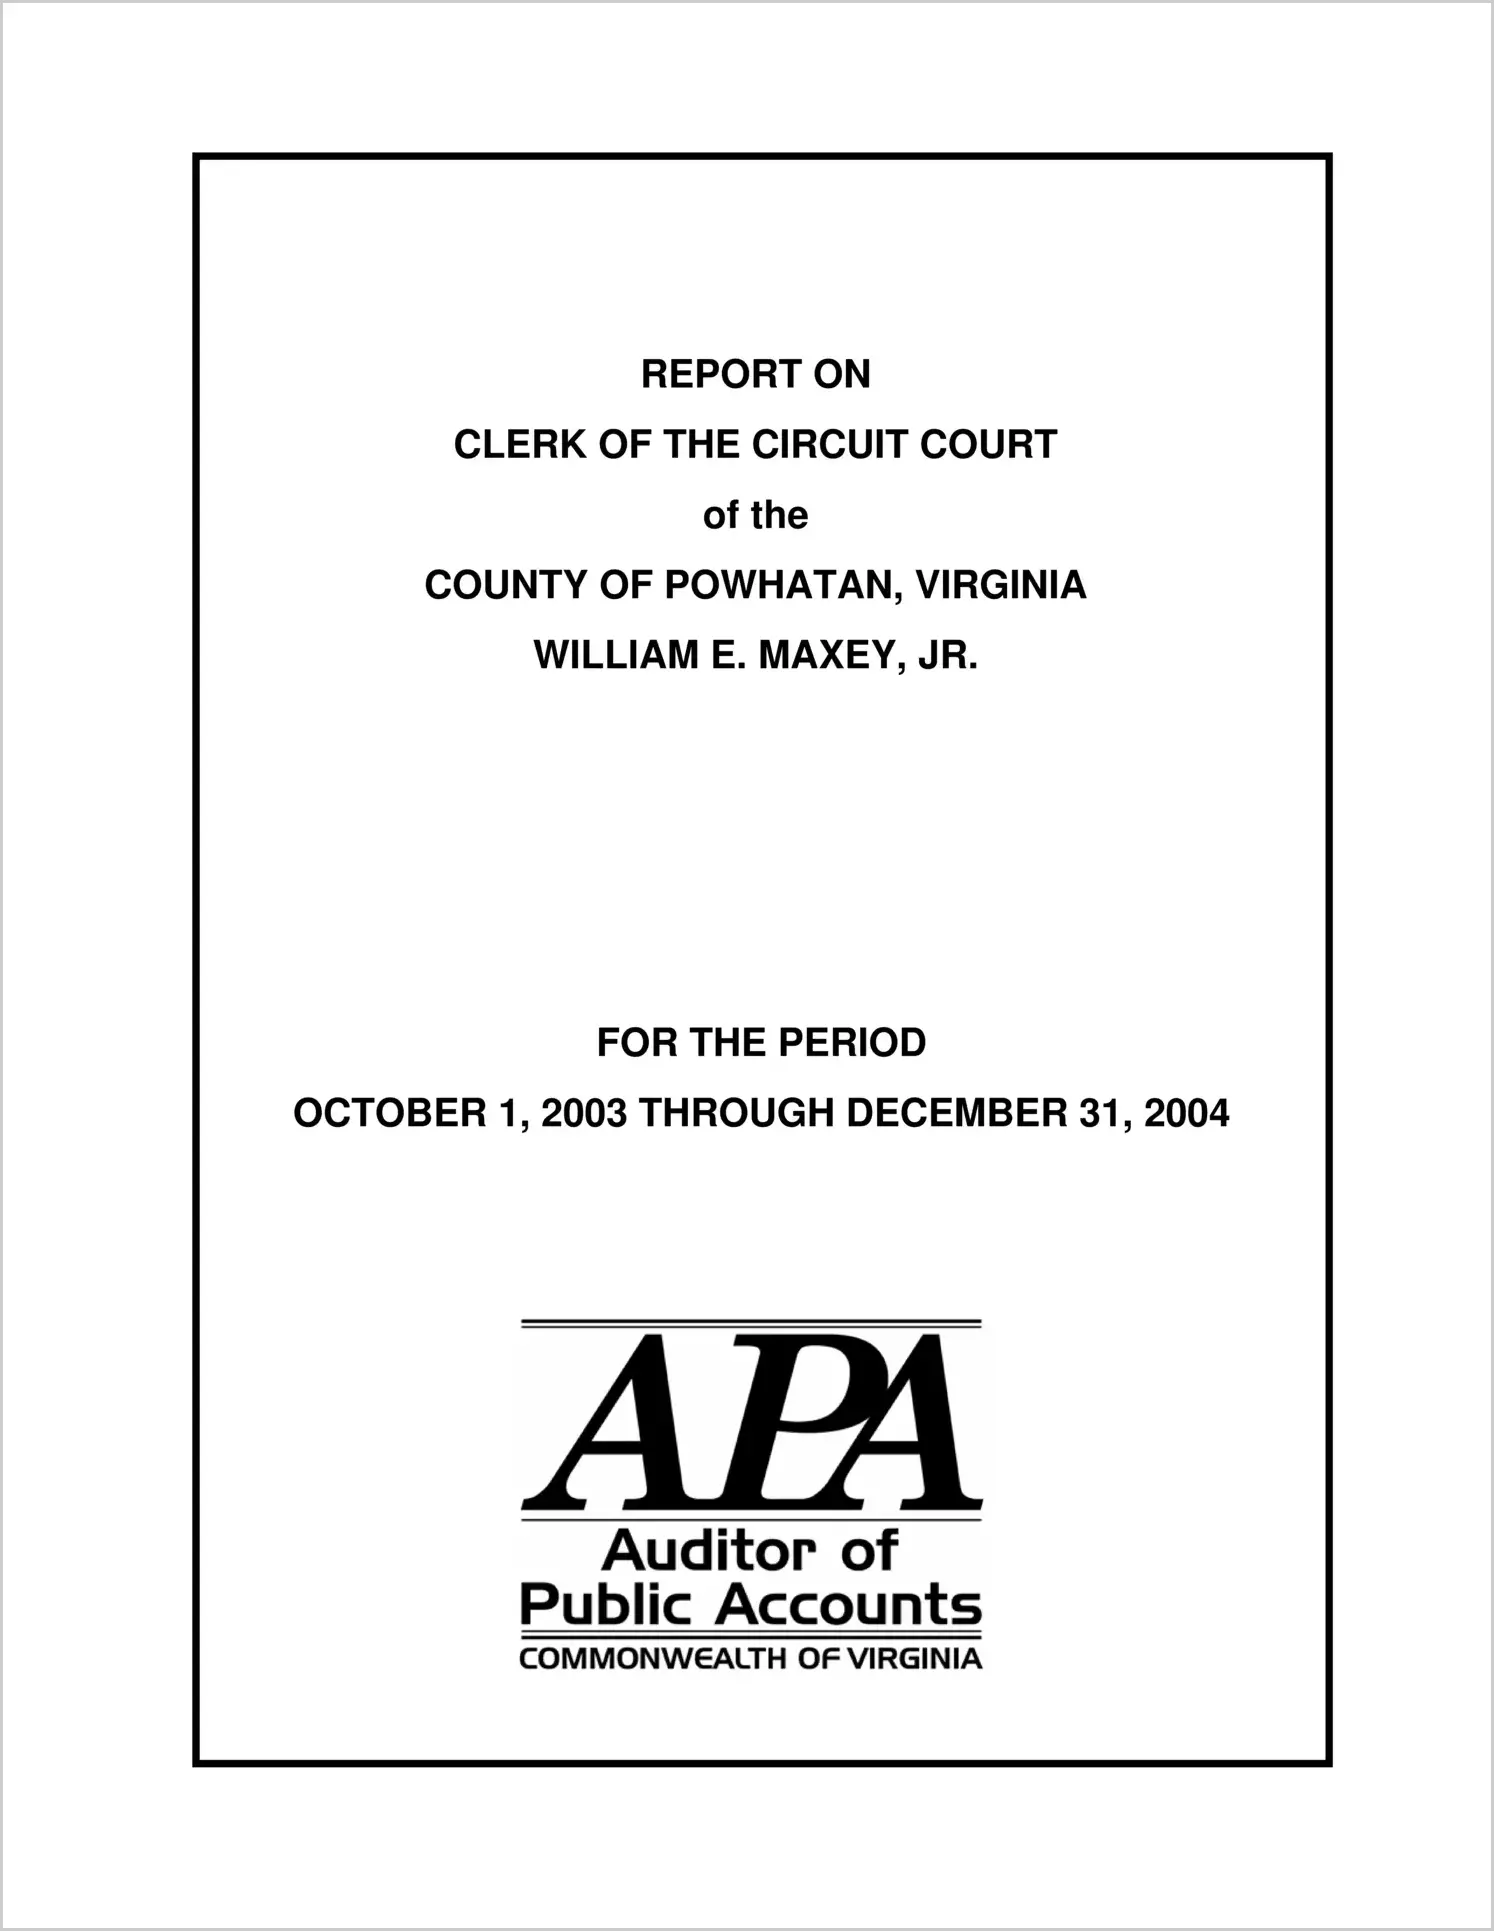 Clerk of the Circuit Court of the County of Powhatan for the period October 1, 2003 through December 31, 2004